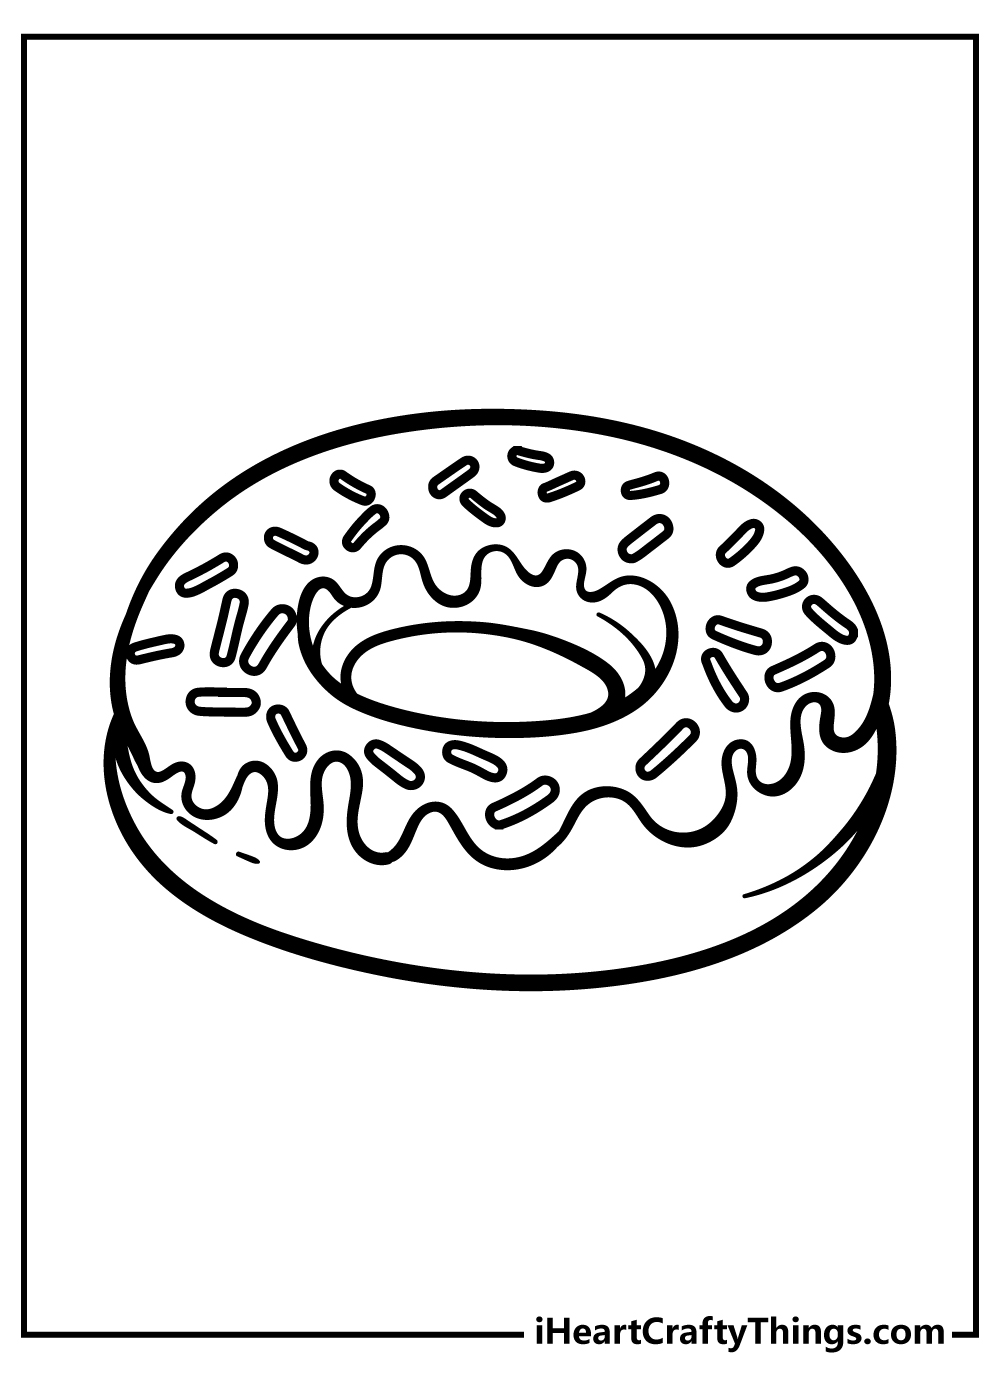 Donut Coloring Pages free pdf download